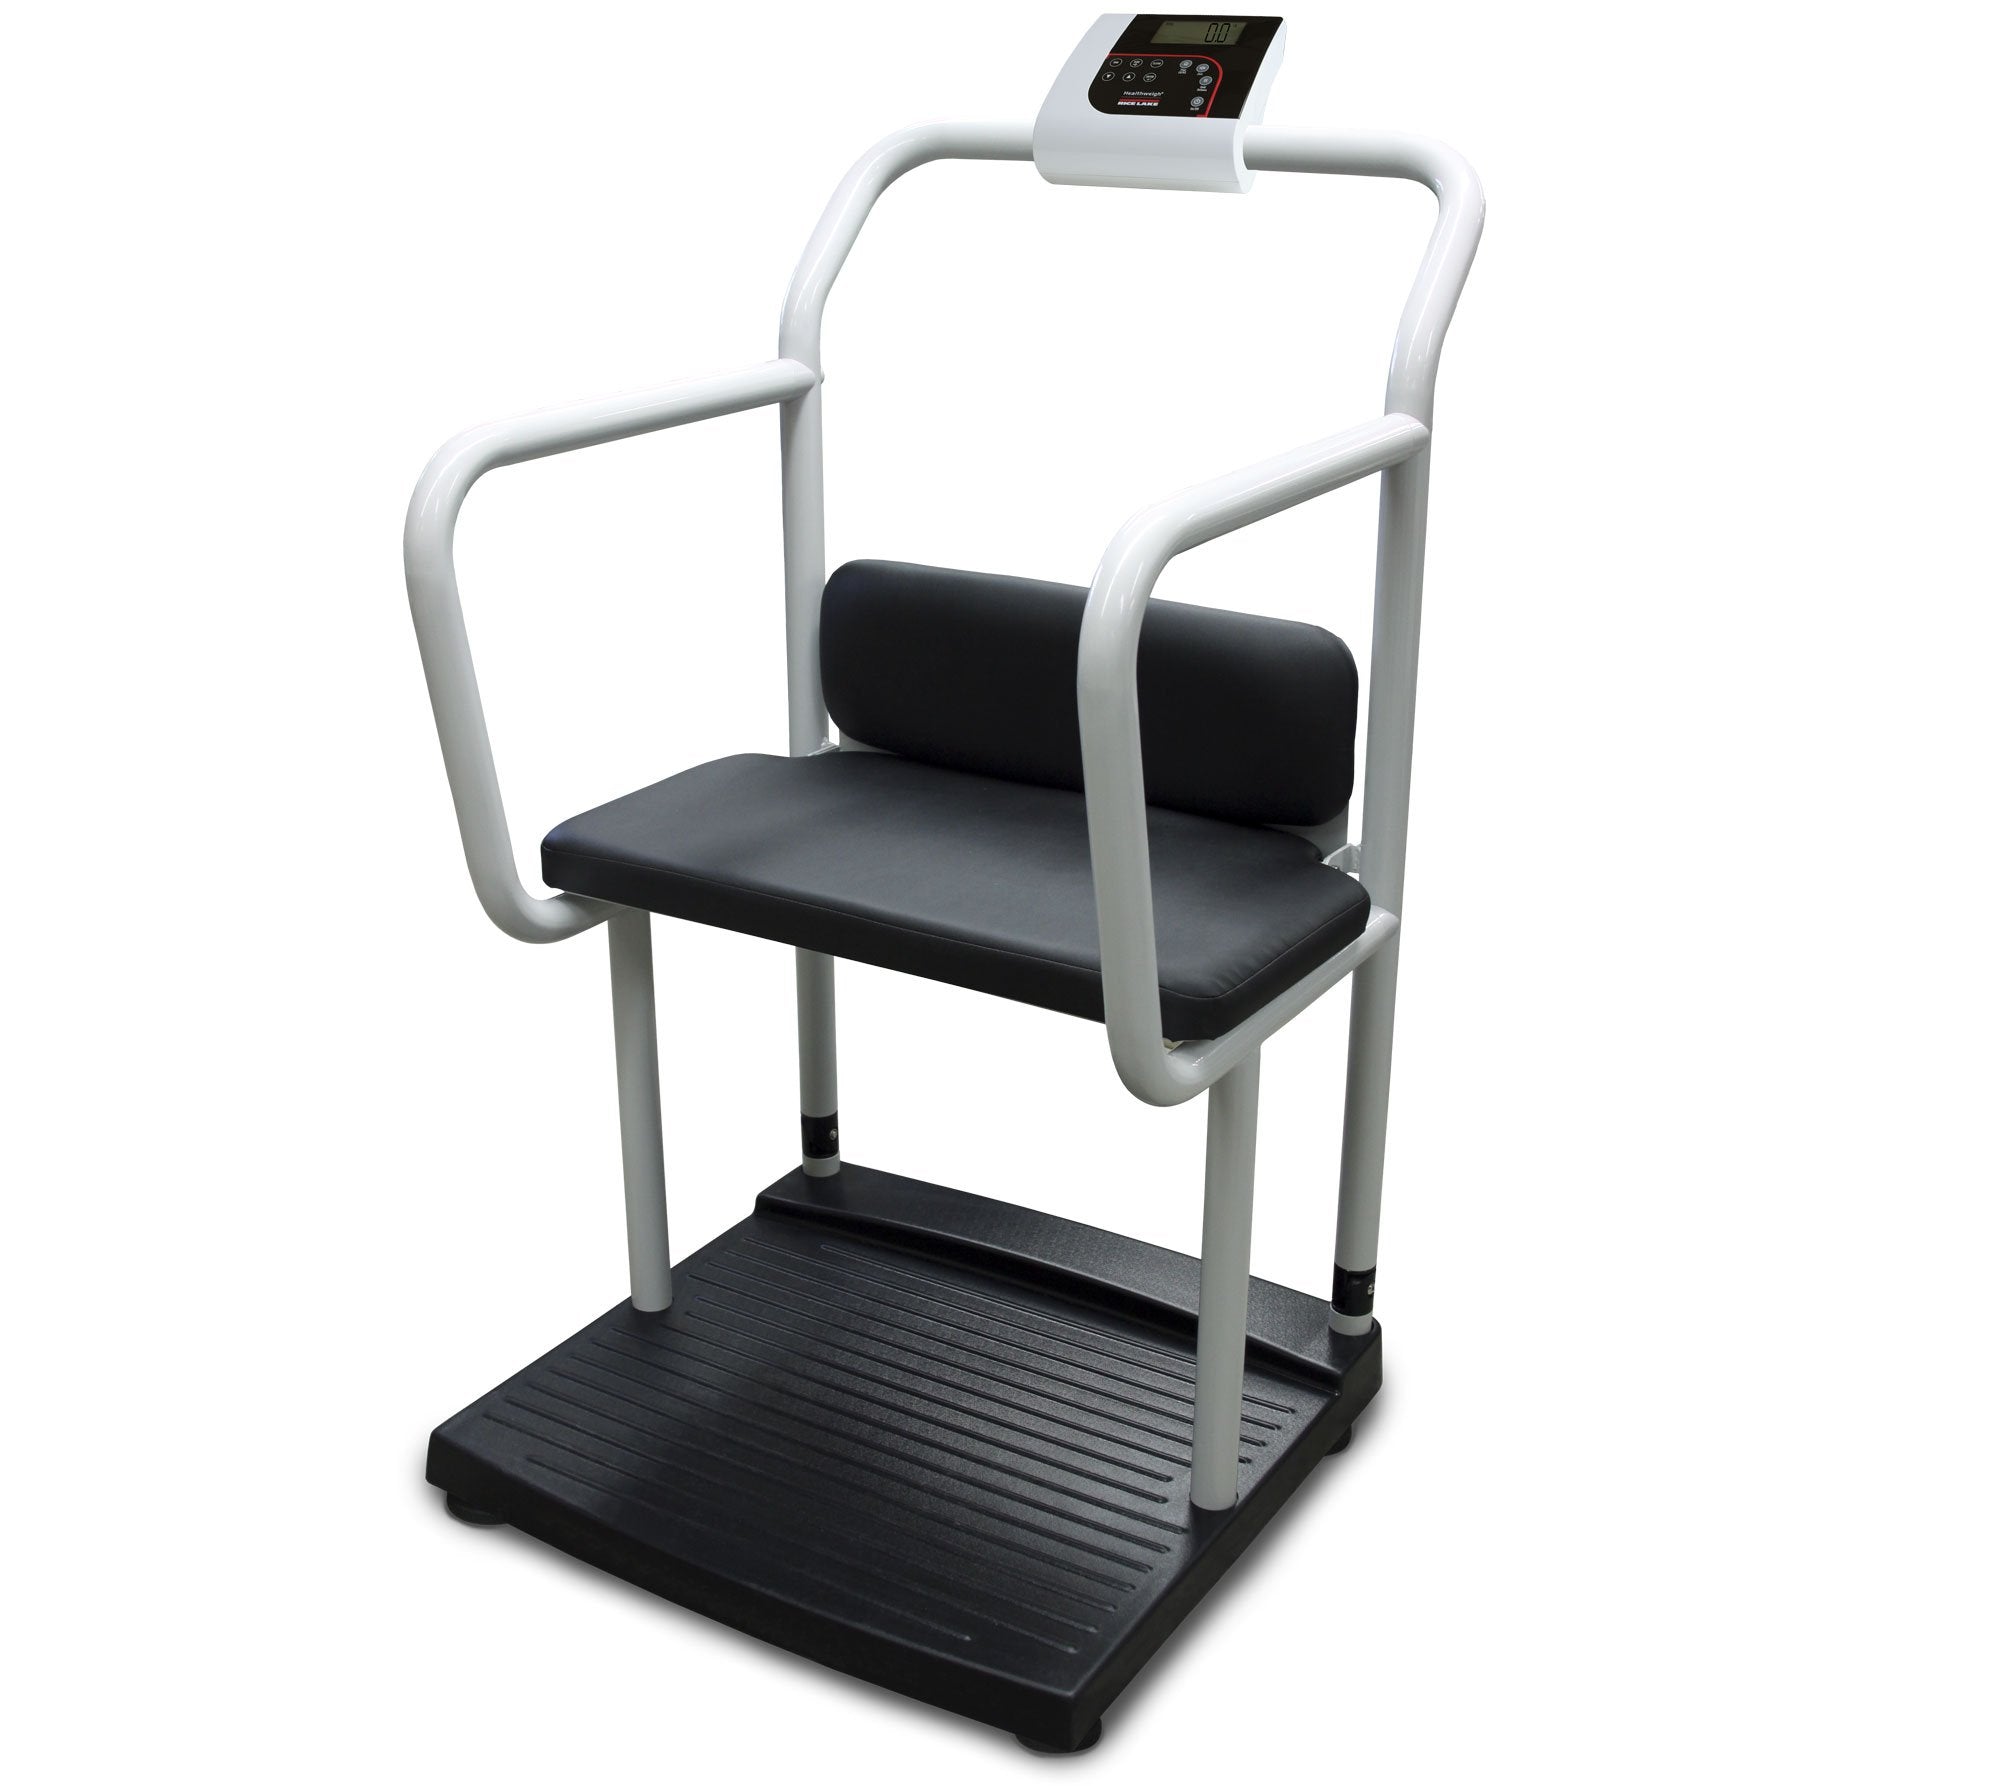 Rice Lake 133120 1000lb(450kg) x 0.2lb(100g), 250-10-4 Bariatric Scale with Handrail and Chair Seat with 2 years Warranty